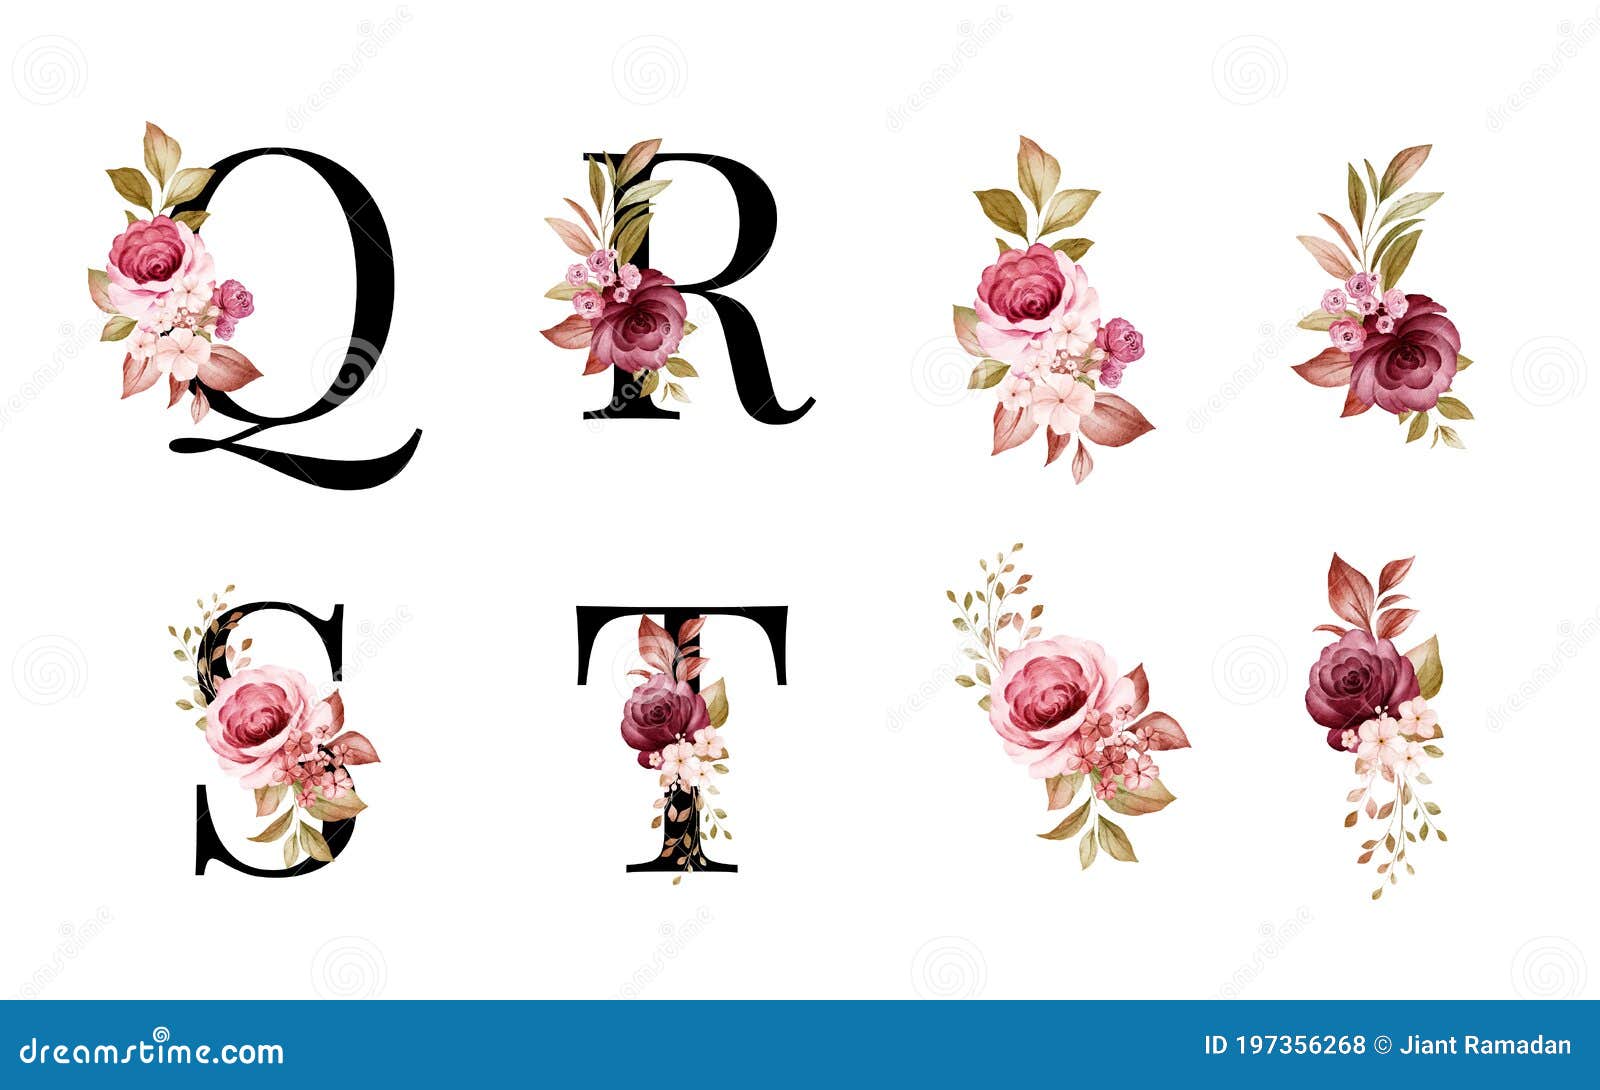 Vetor de Watercolor floral alphabet set of U, V, W, X with red and brown  flowers and leaves. Flowers composition for logo, cards, branding, etc do  Stock